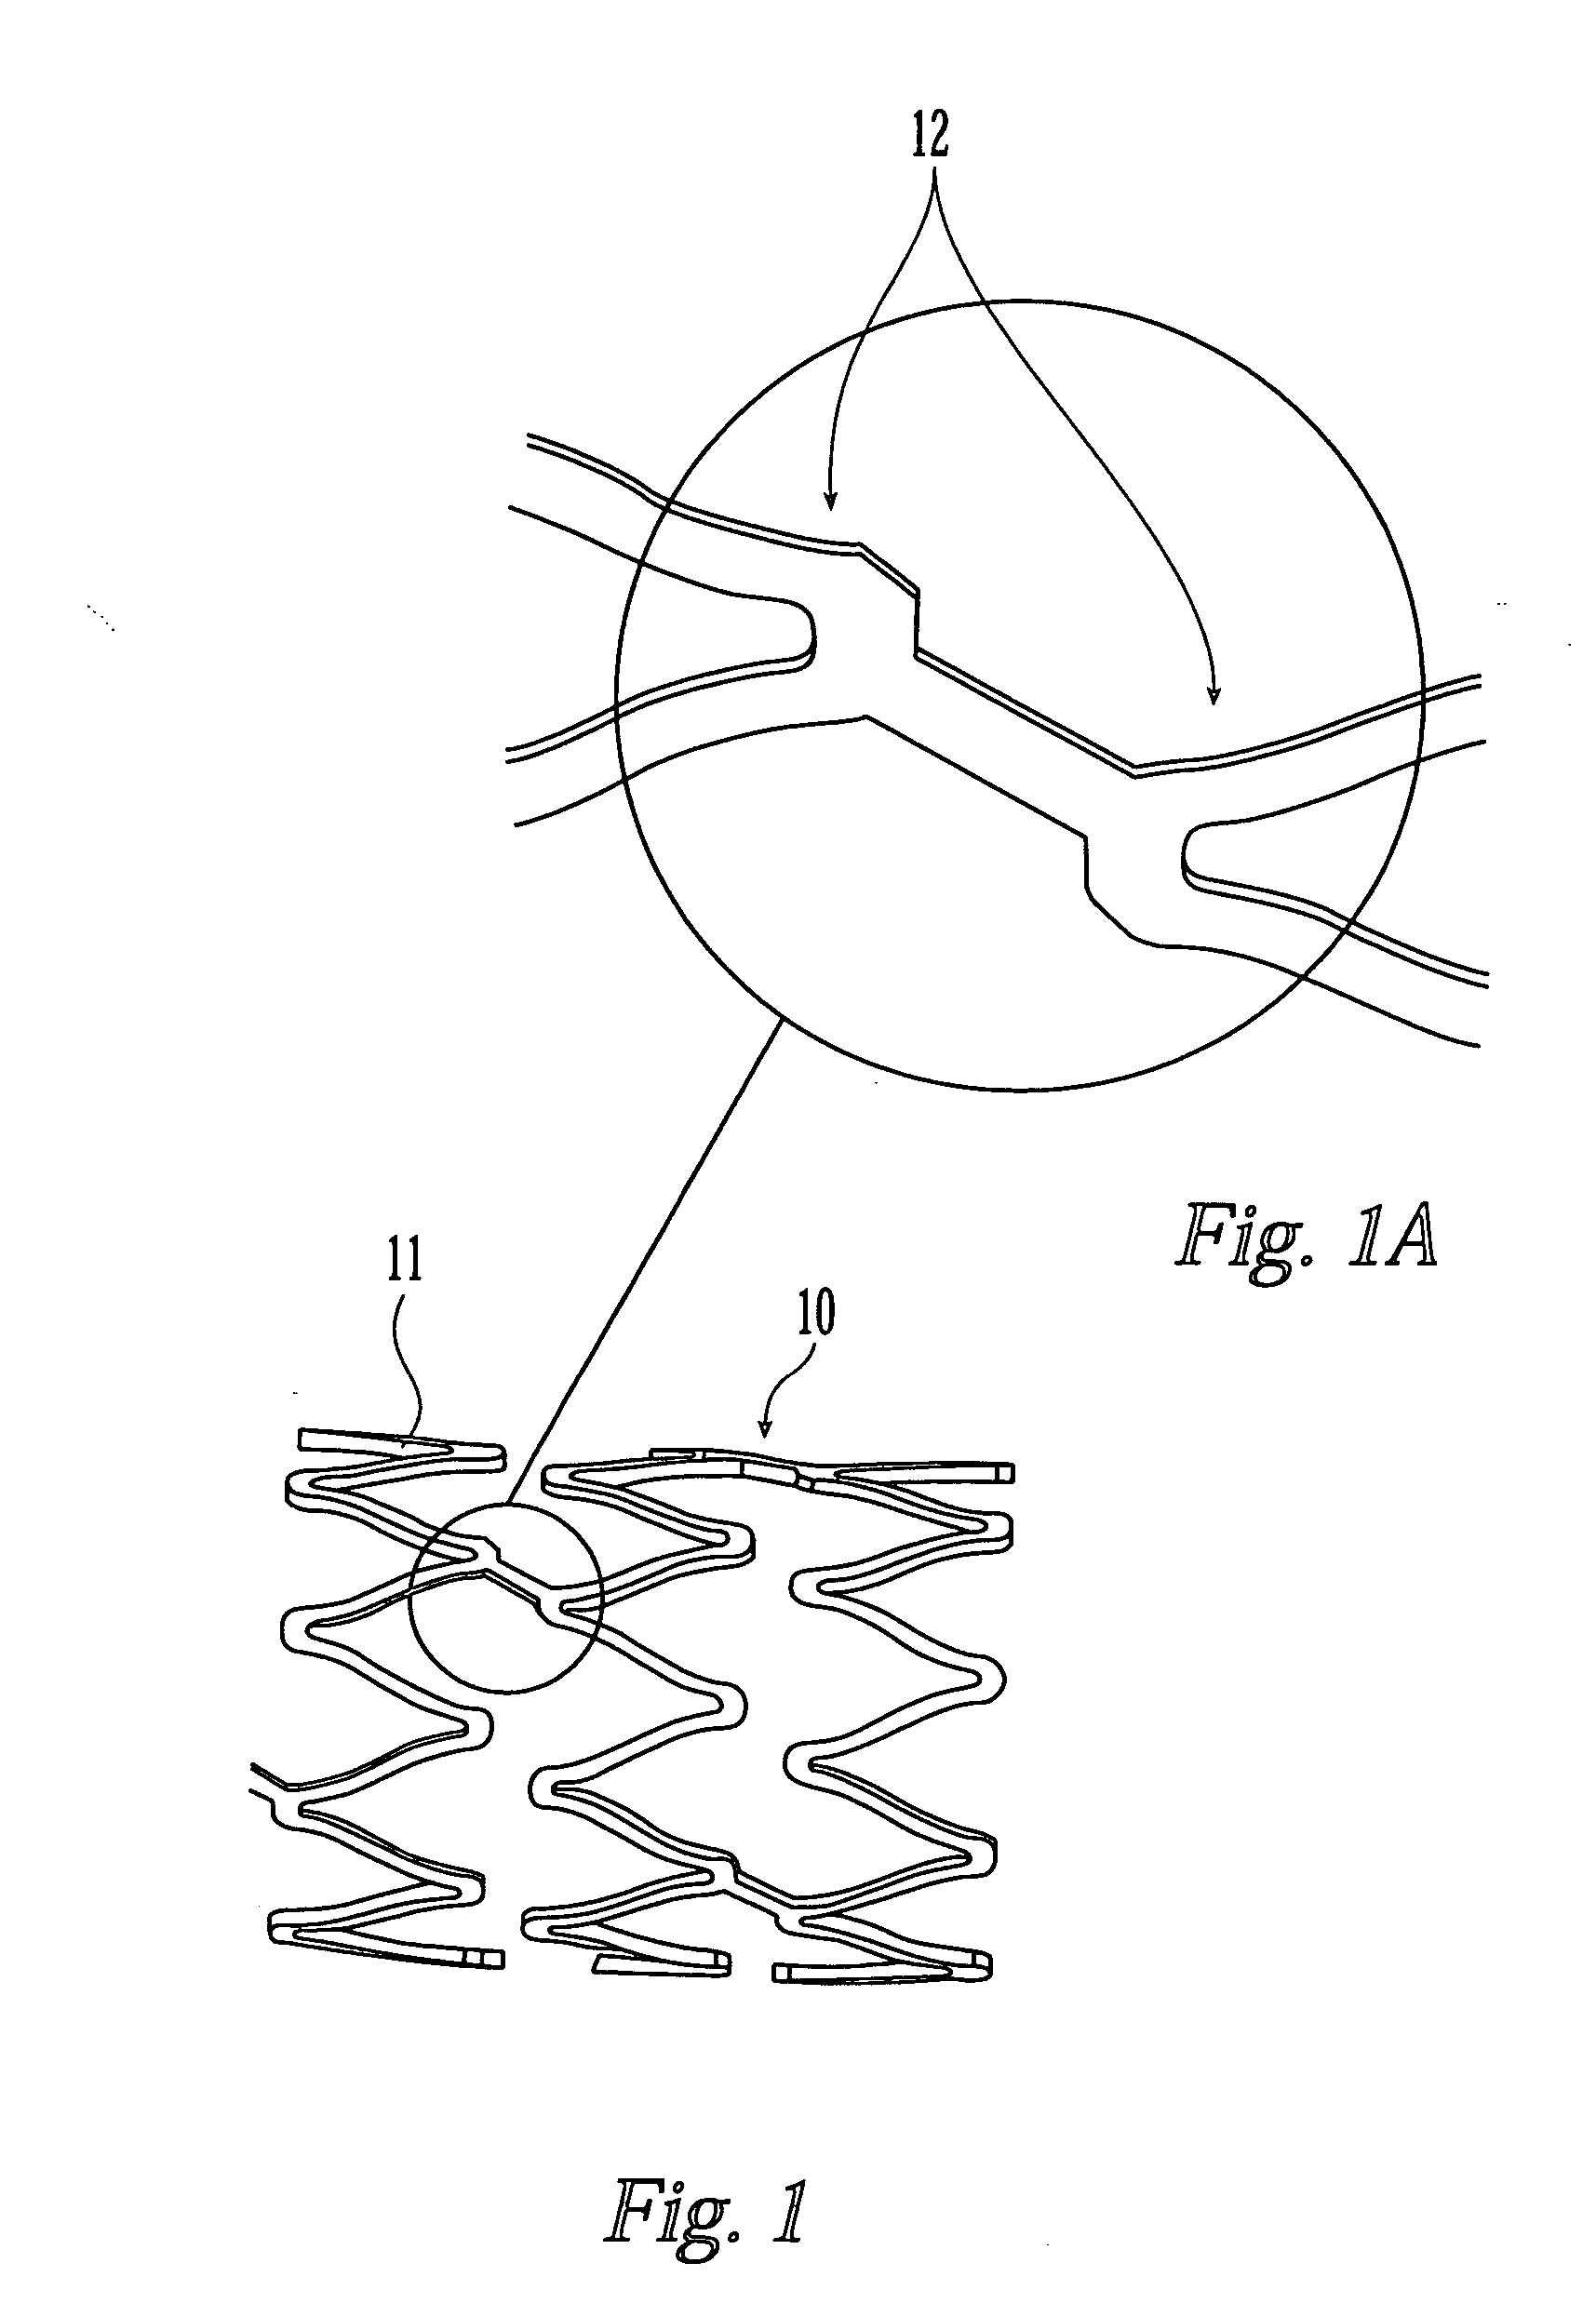 Coated medical device and method for manufacturing the same